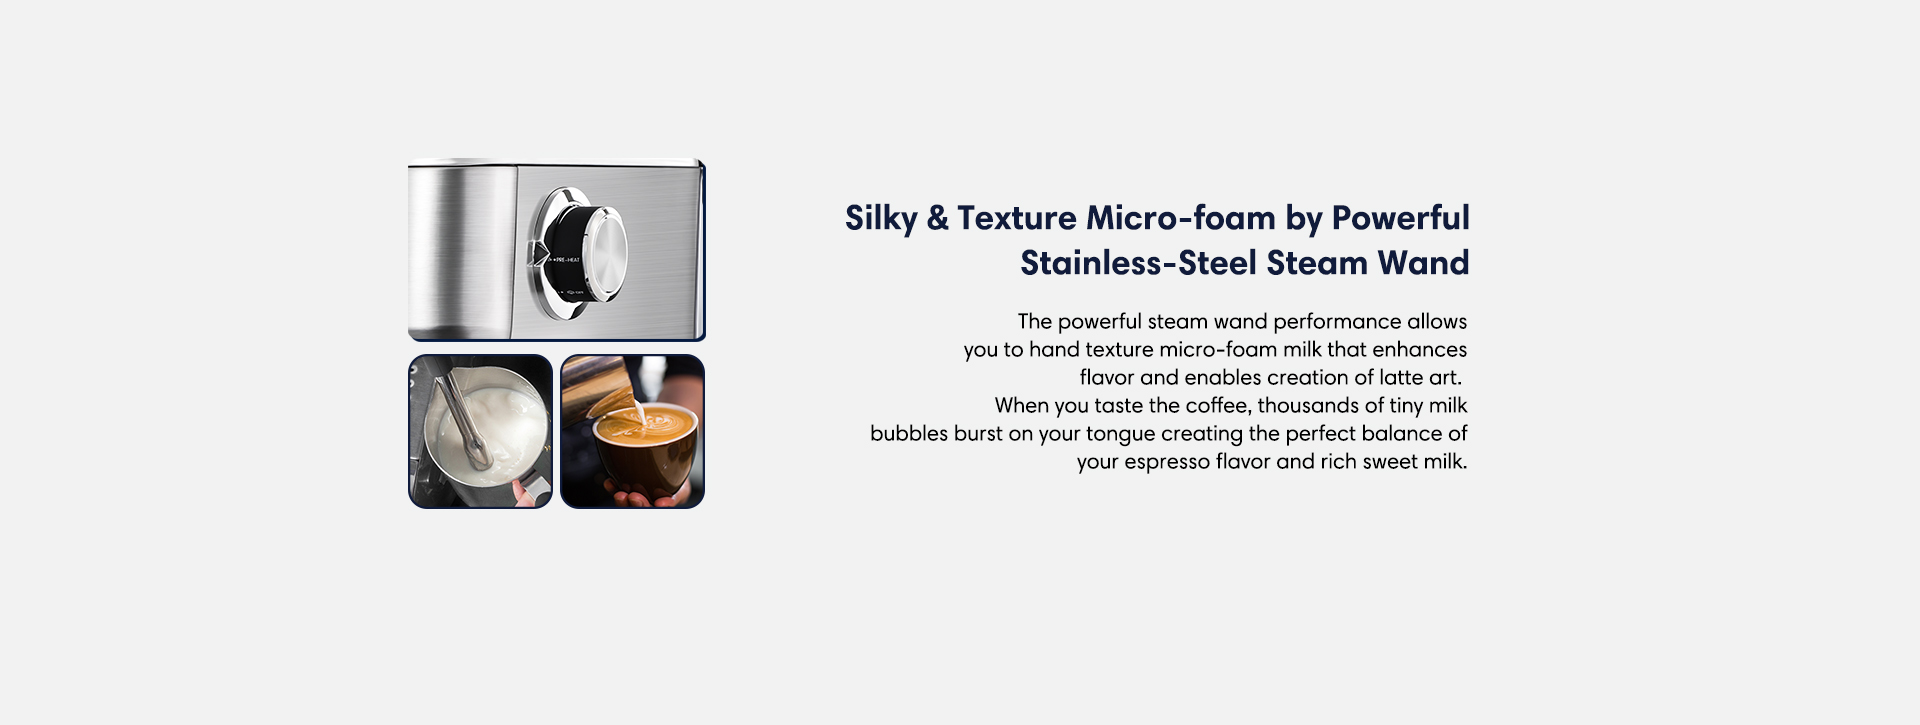 Silky and texture micro-foam the steam wand performance allows you to hand texture micro-foam that enhances flavor and enables creation of latte art.